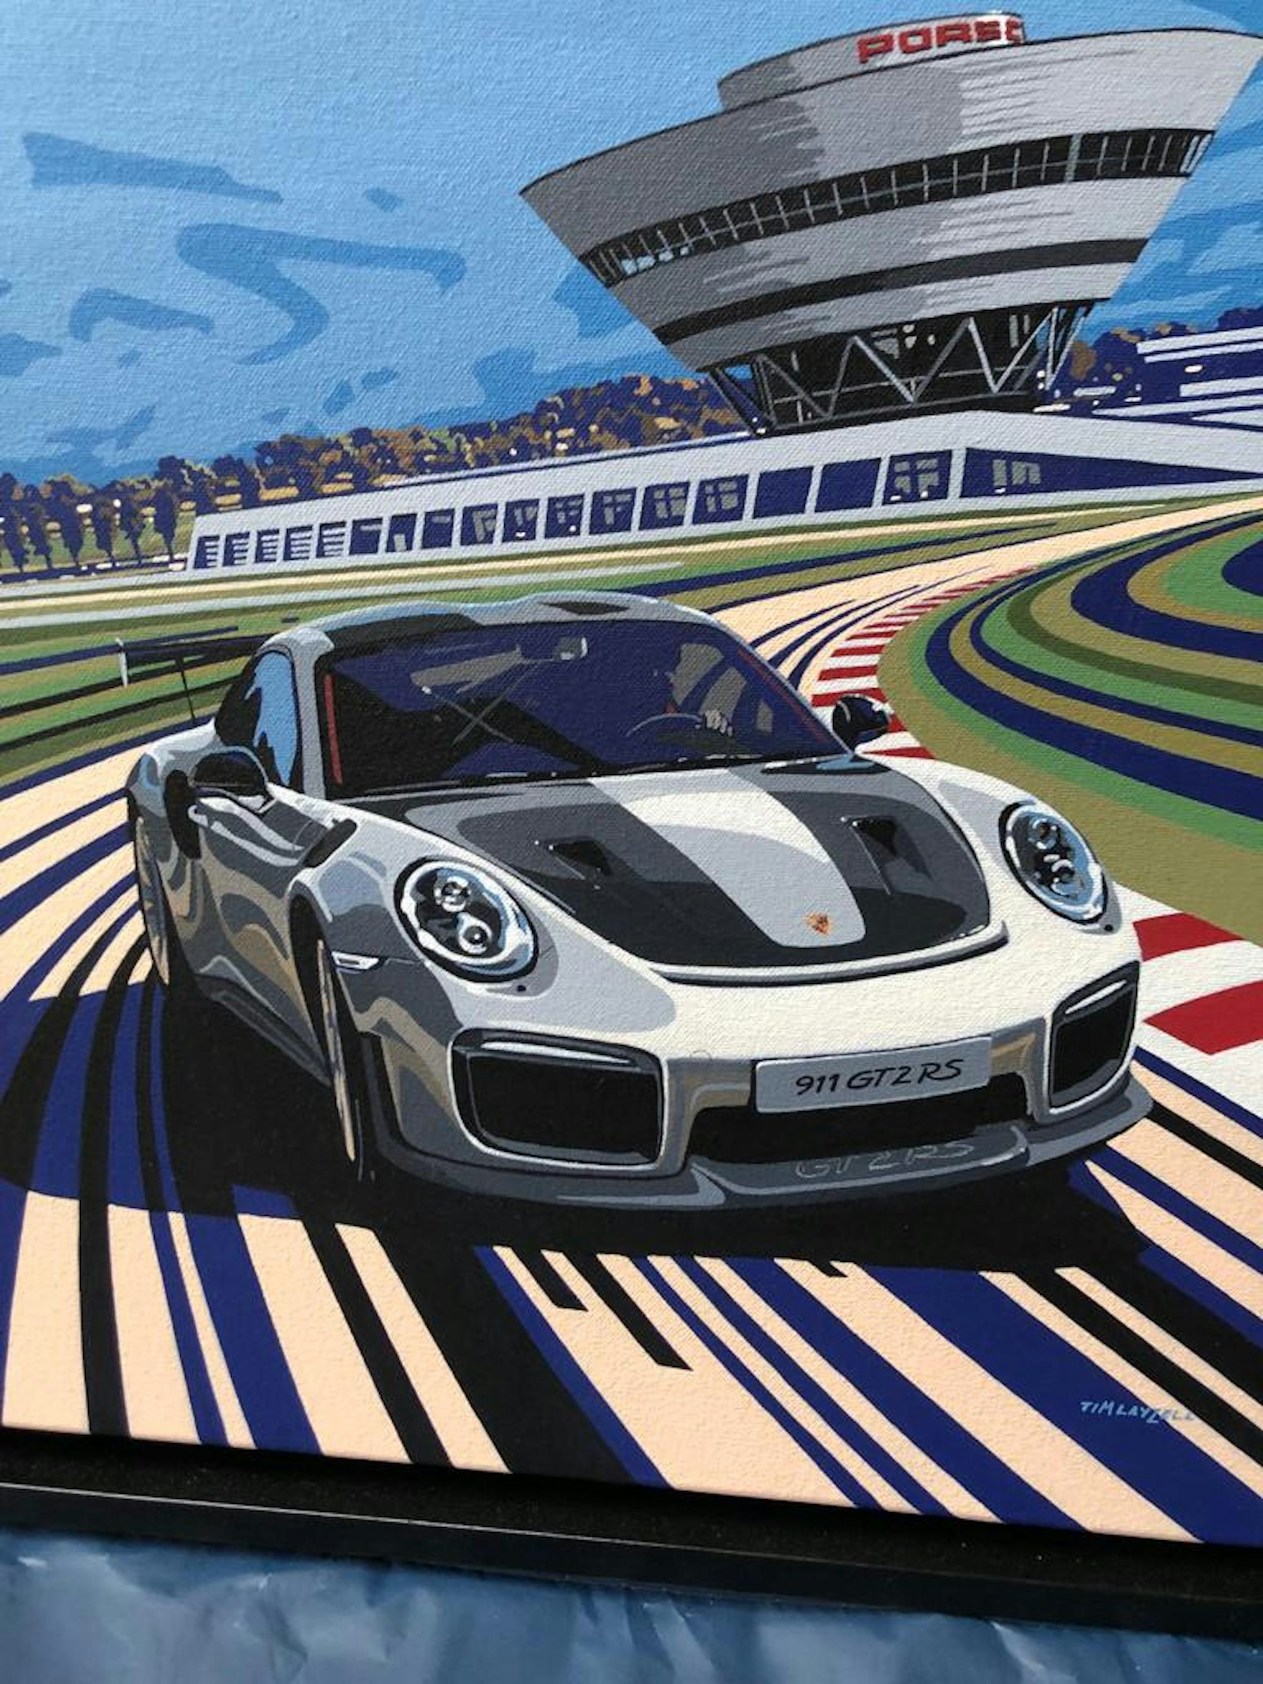 ORIGINAL PAINTING BY TIM LAYZELL - 911 GT2 RS LEIPZIG for sale auction in Thatcham, Reading, United Kingdom